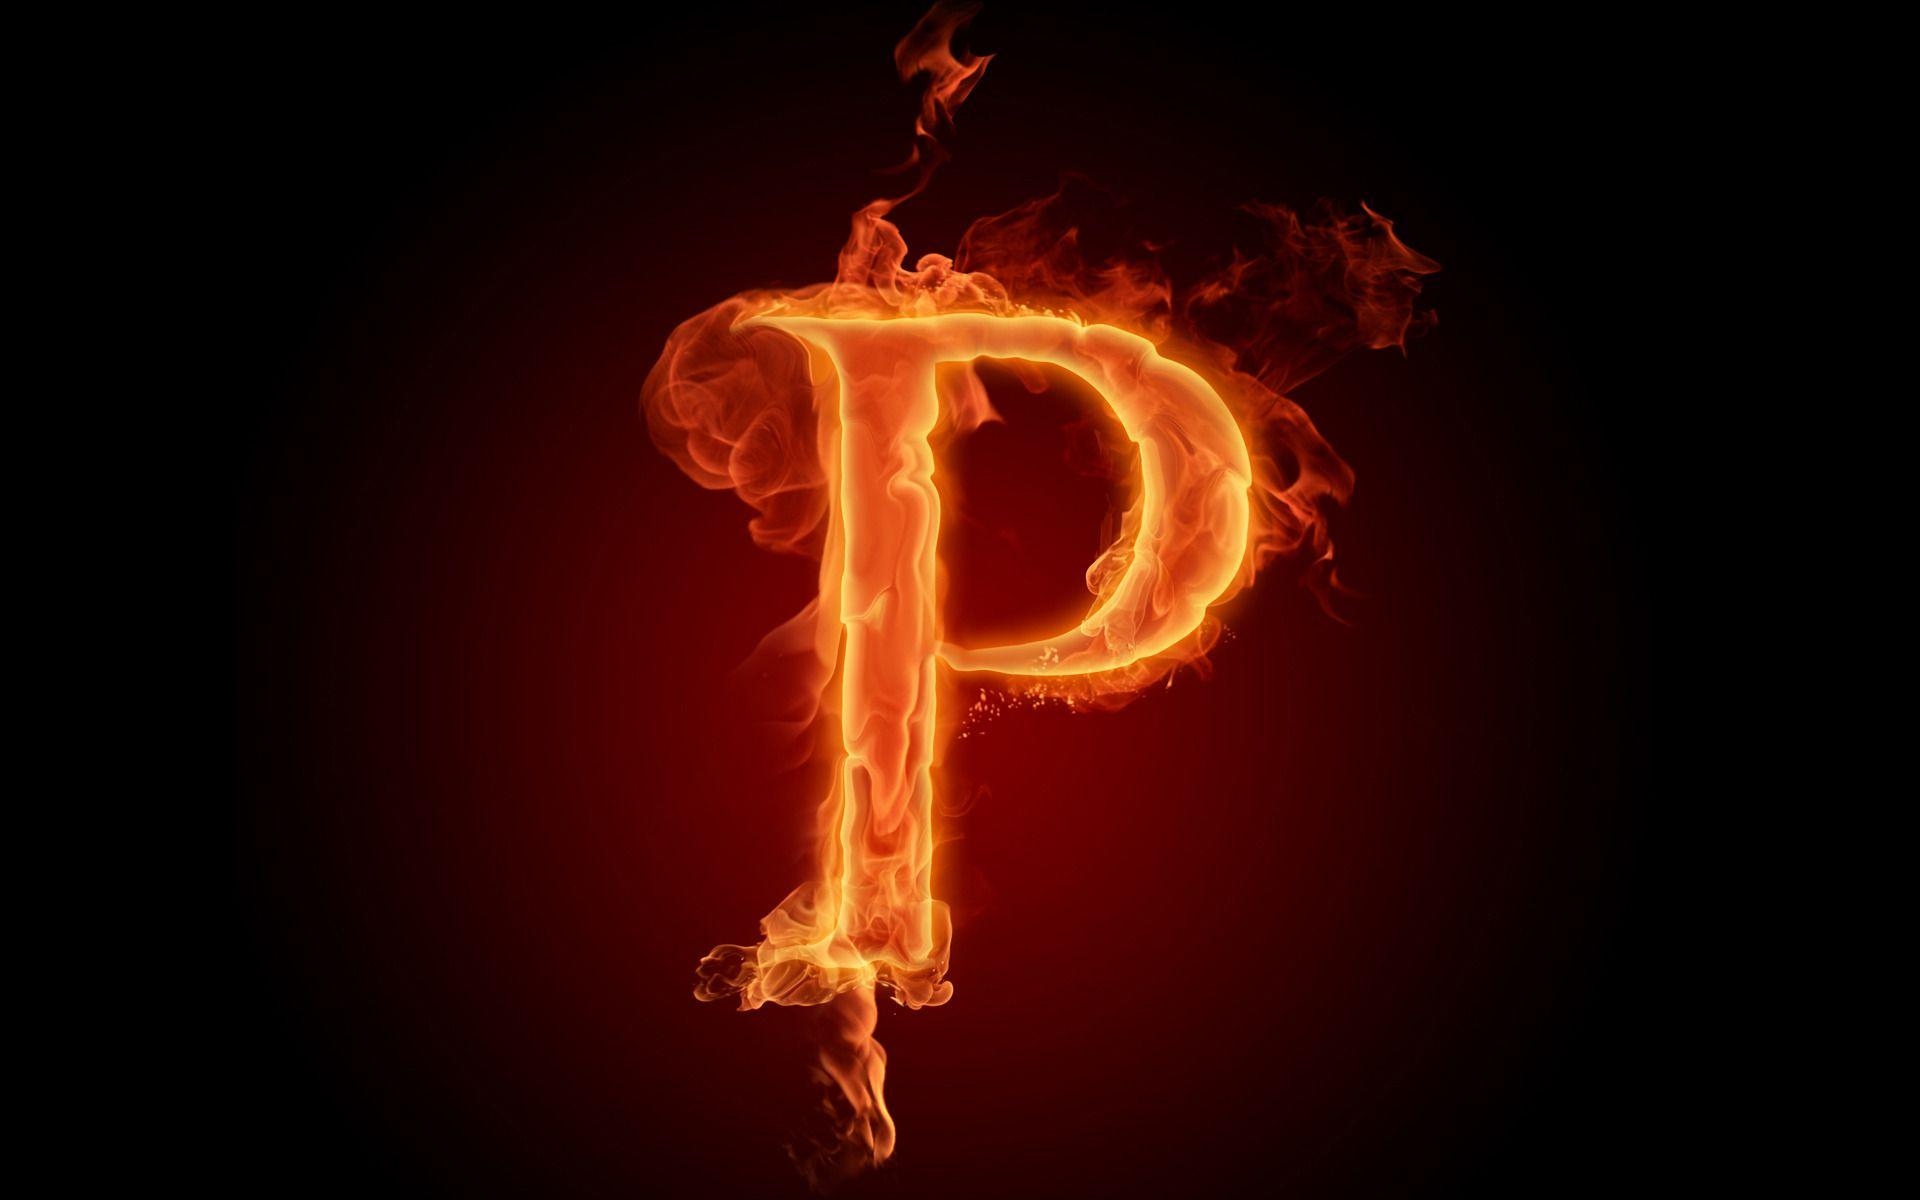 P Letter Design In Flame